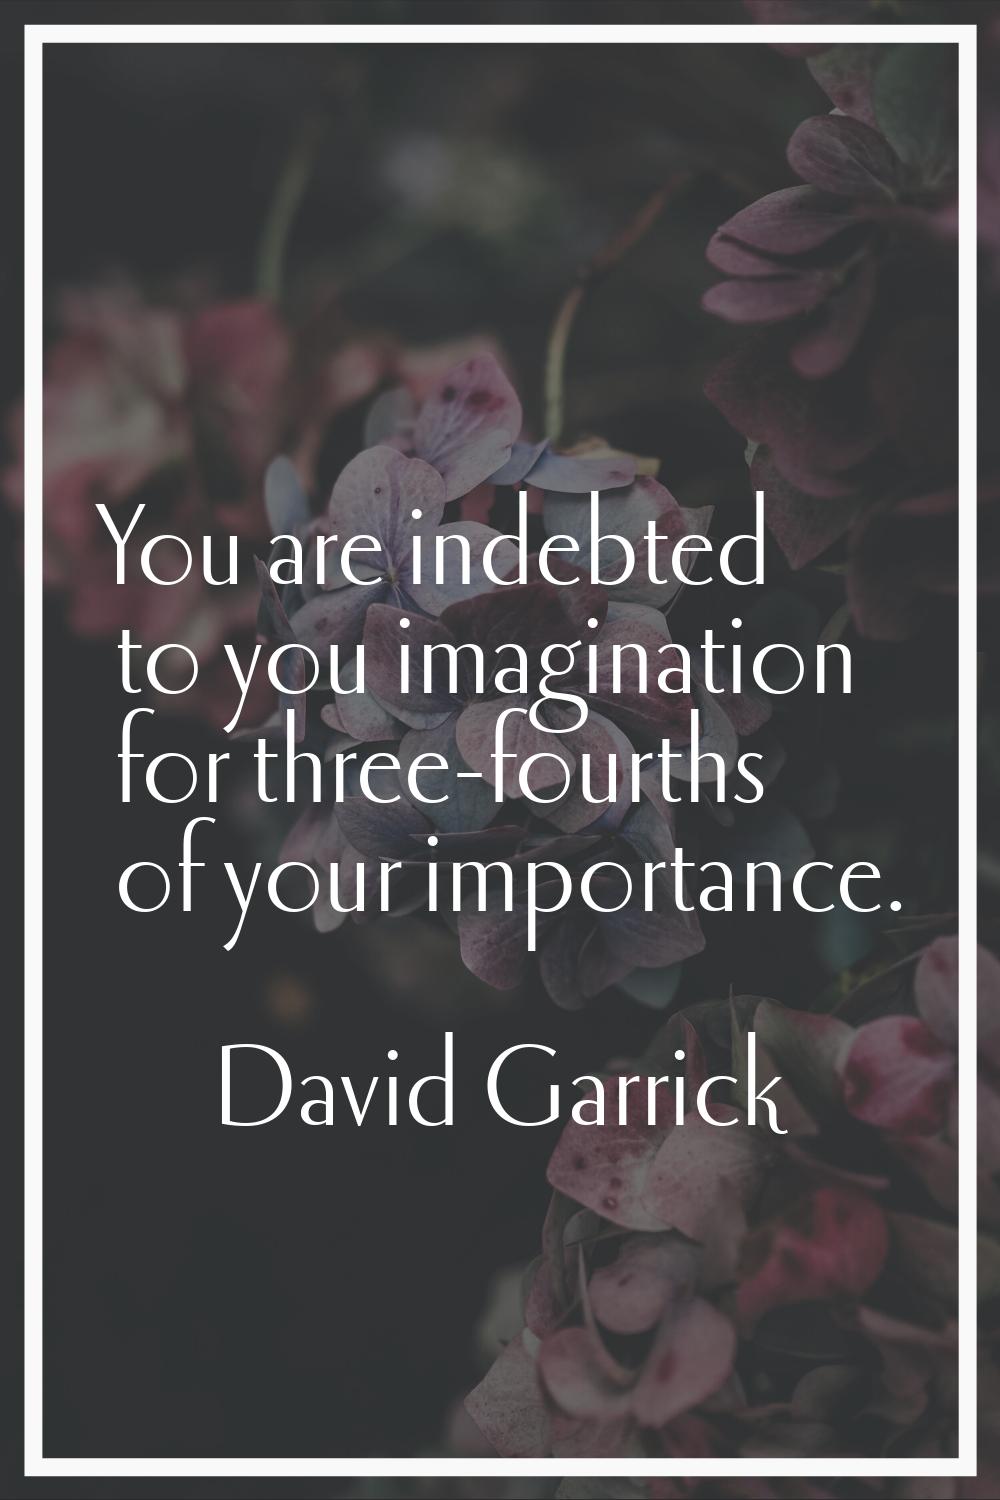 You are indebted to you imagination for three-fourths of your importance.